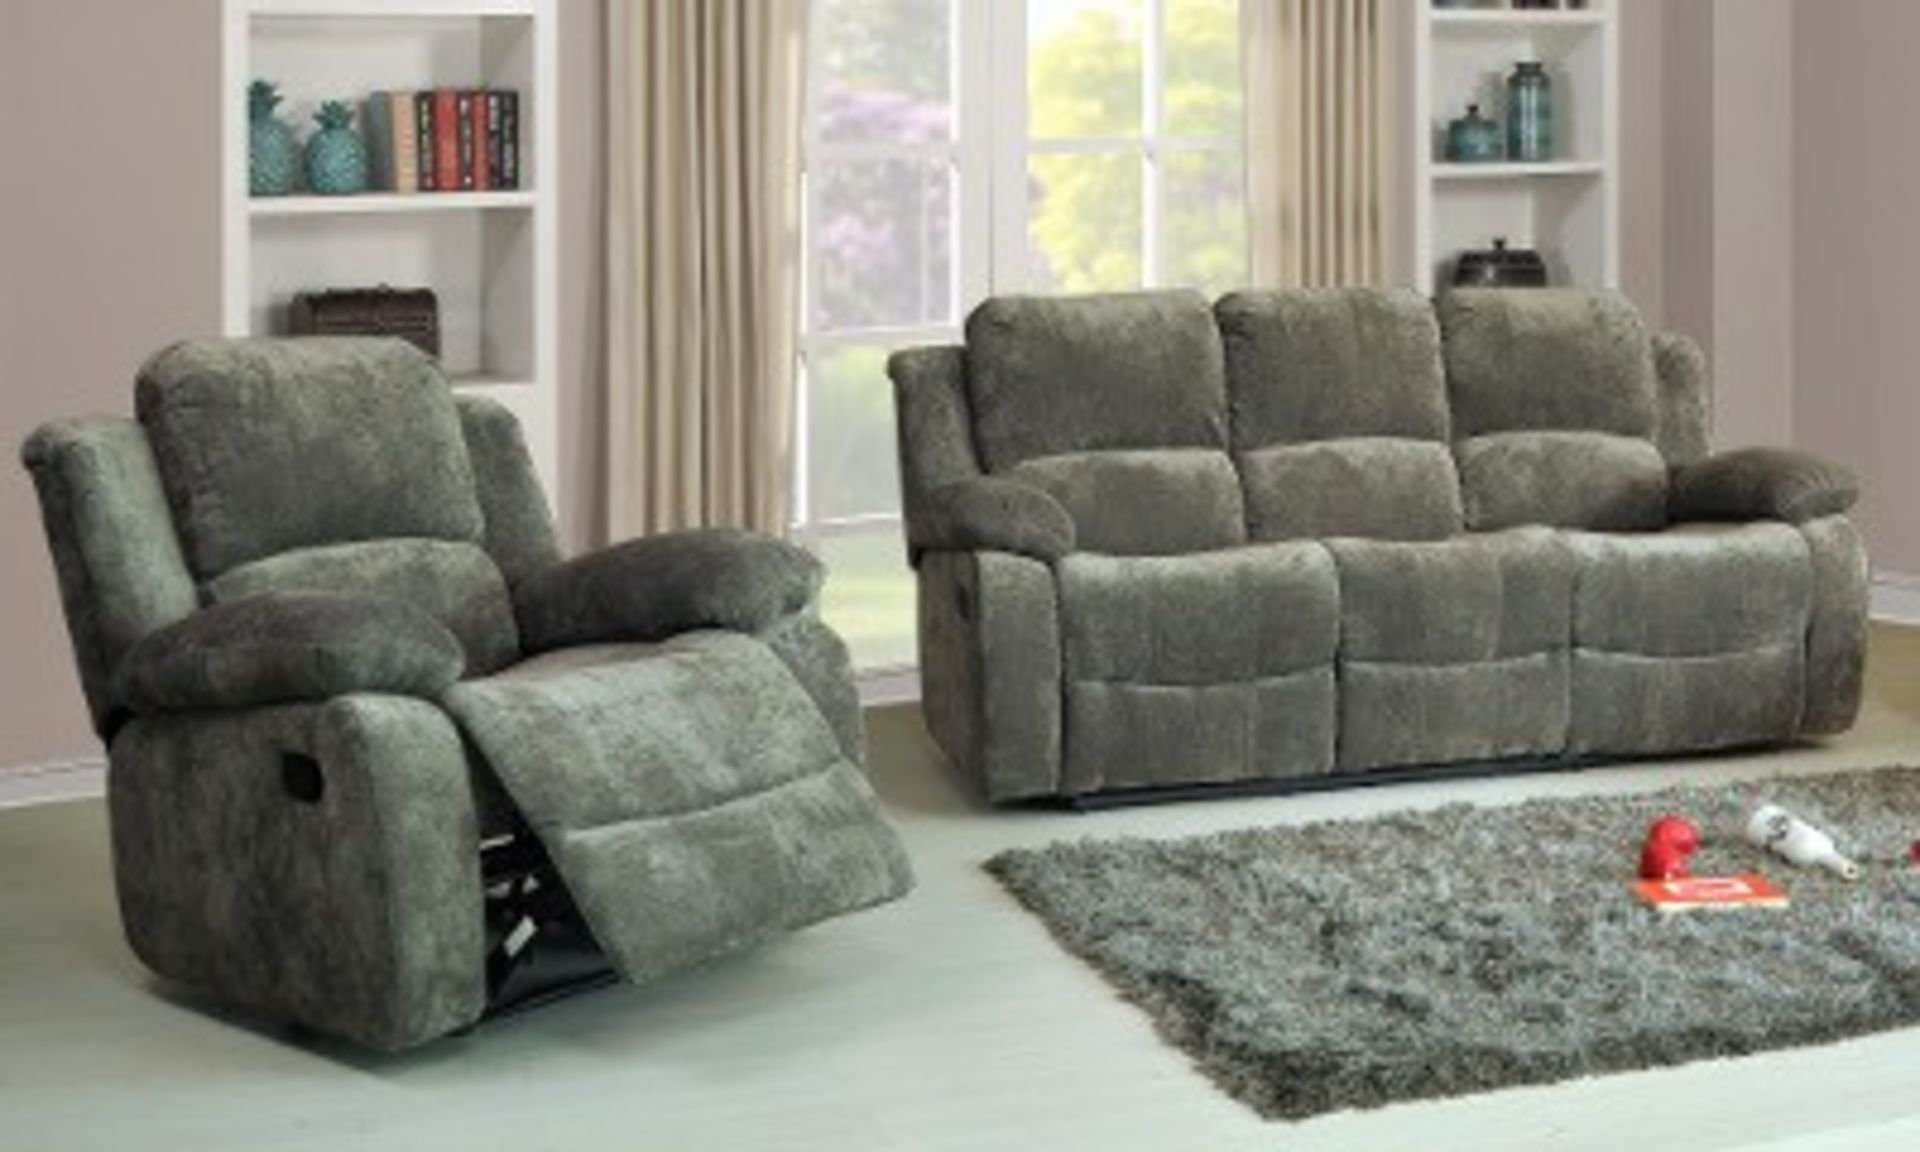 Supreme Valance charcoal grey fabric 3 seater reclining sofa - Image 2 of 3